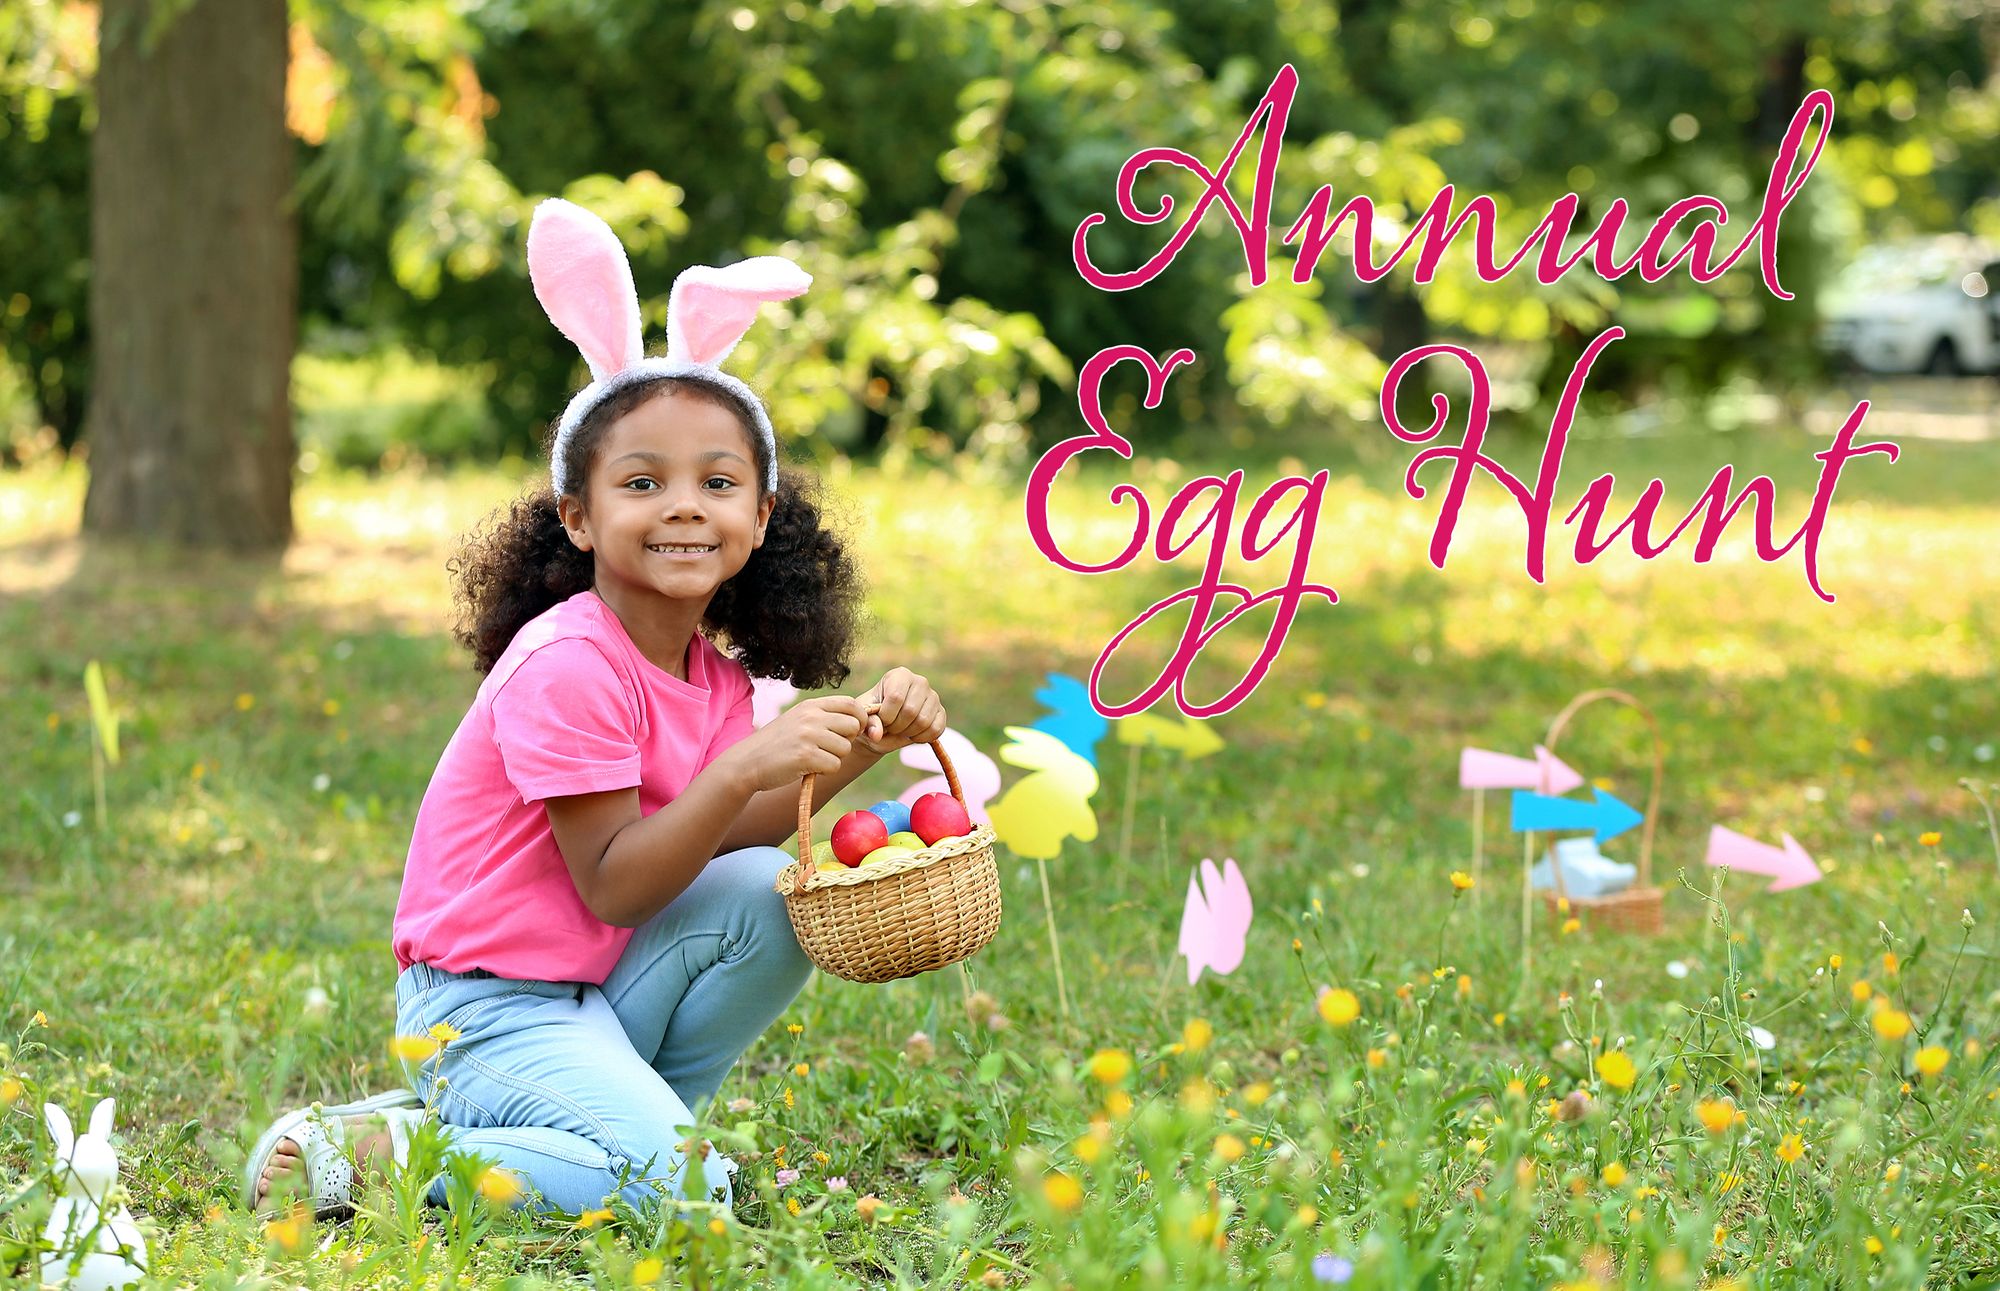 Hop On Over To The Annual Egg Hunt At The Historic Governors' Mansion